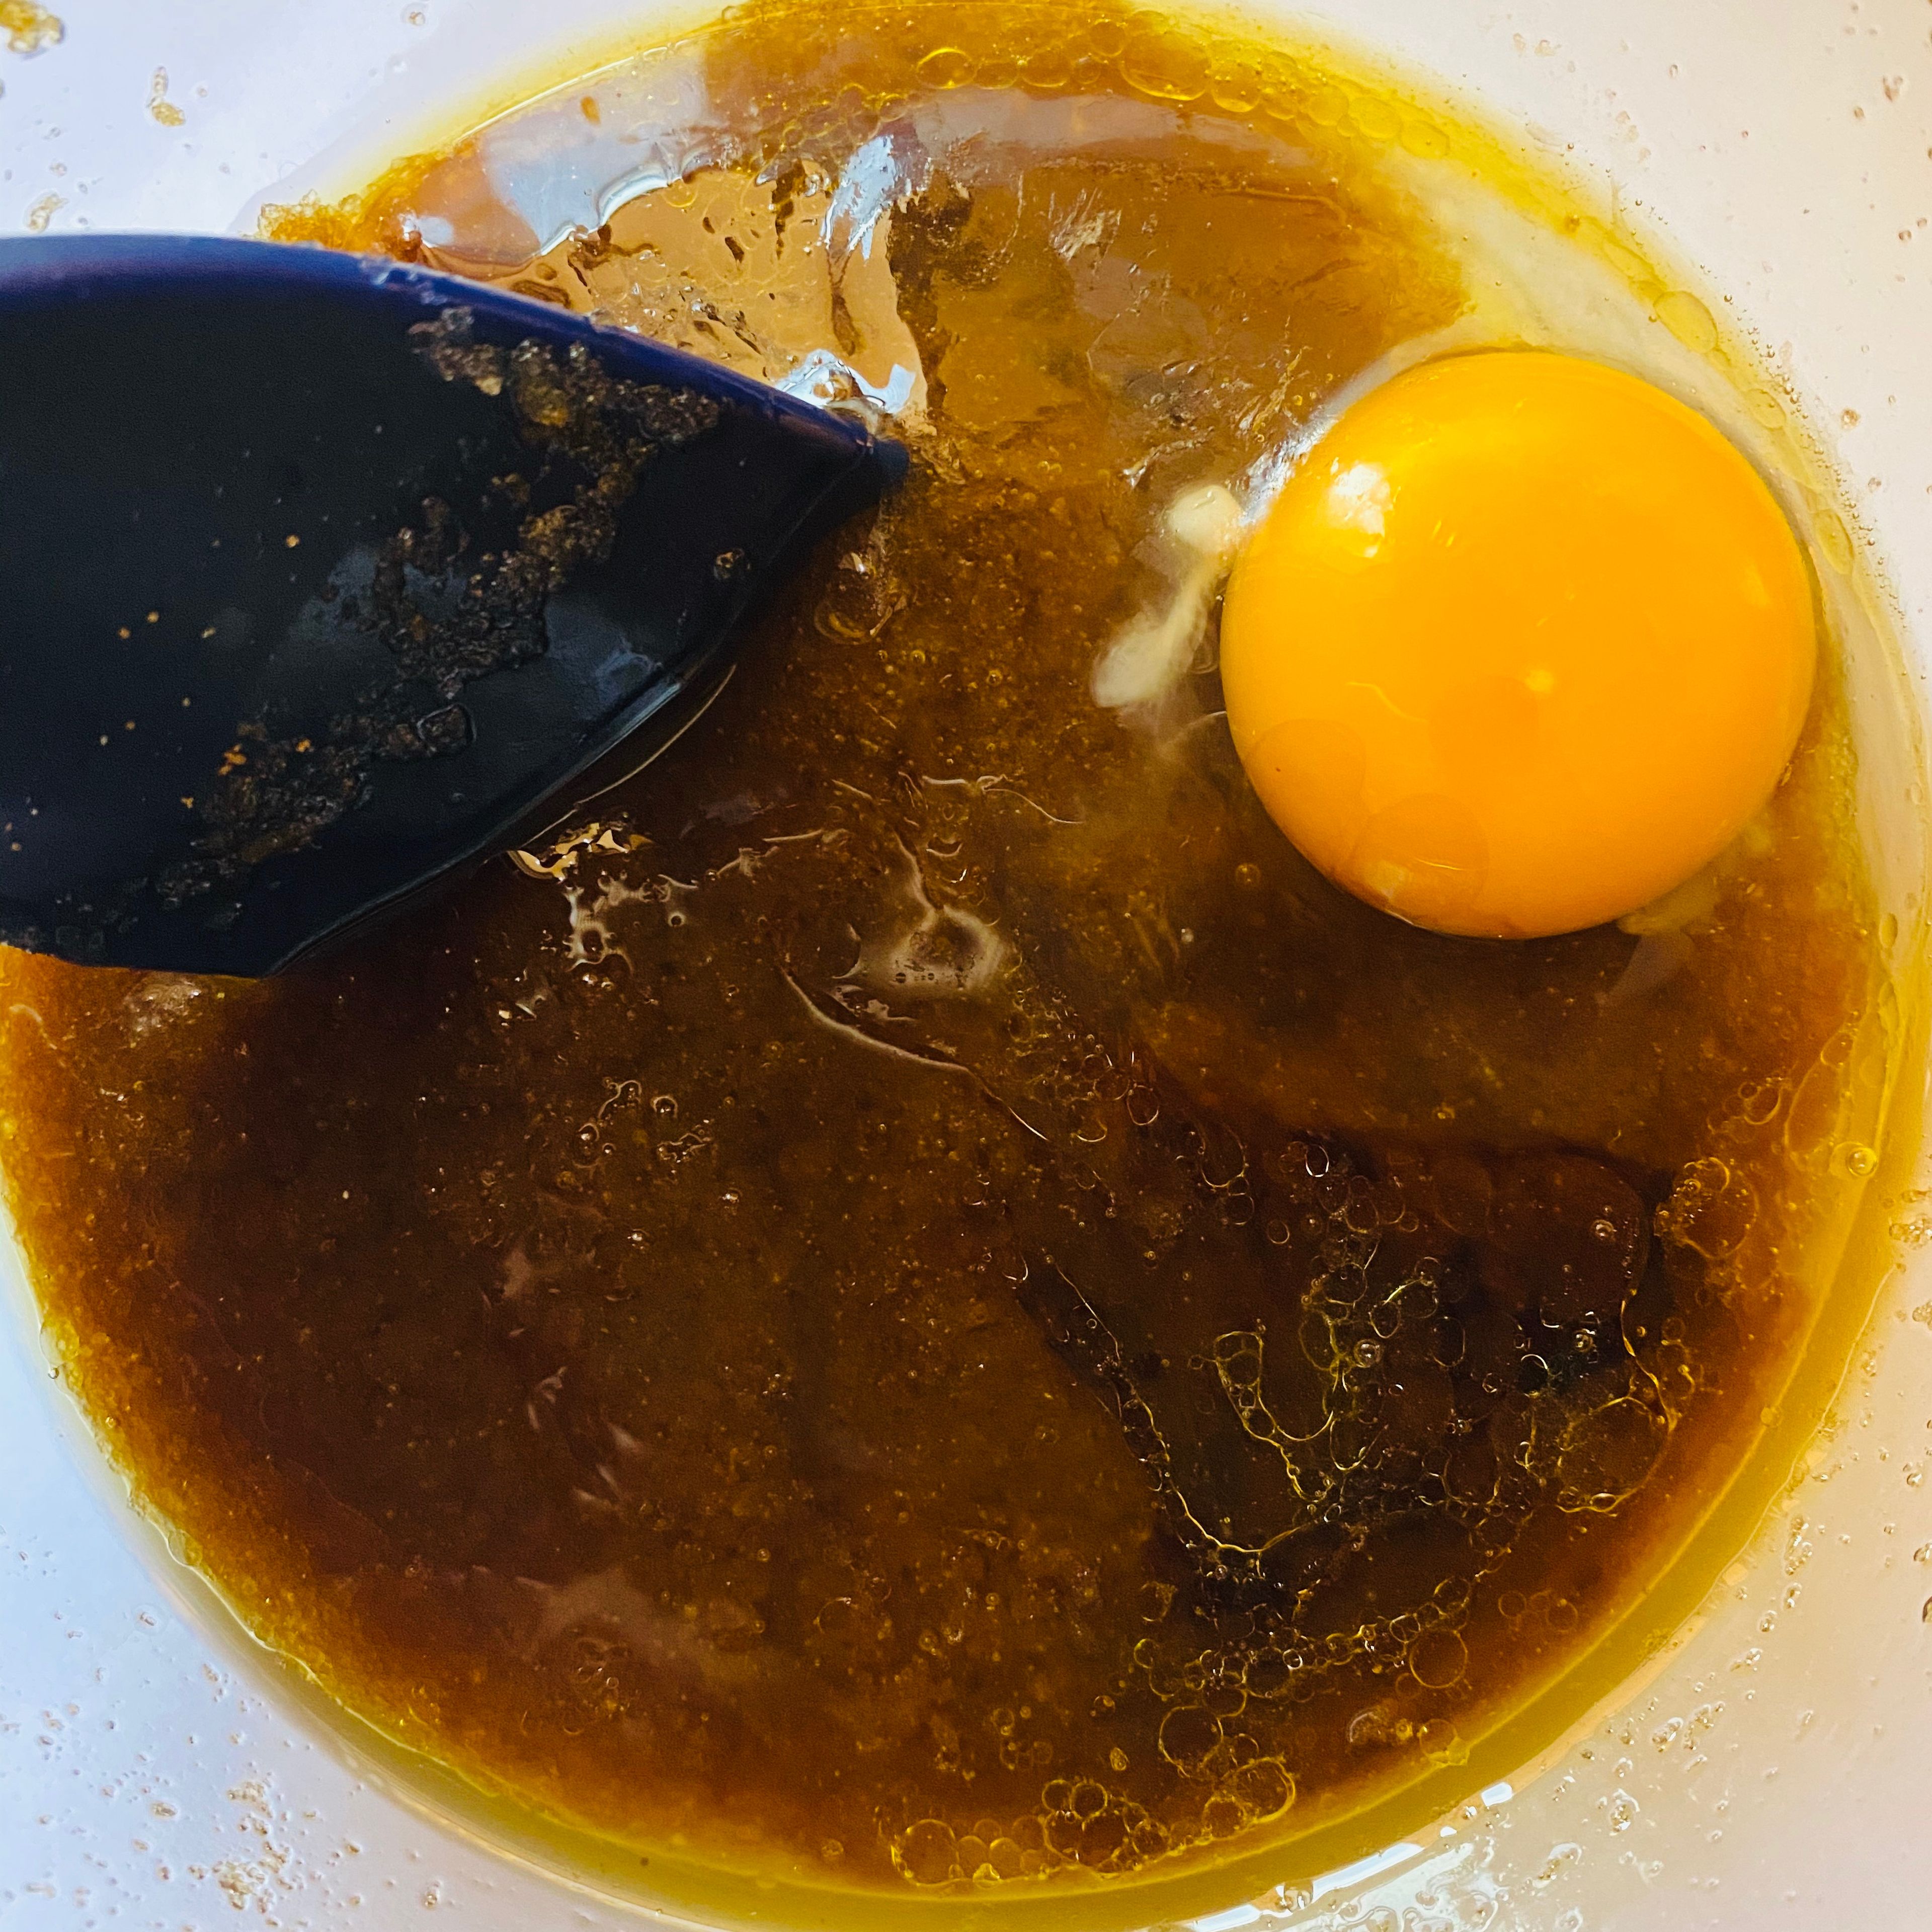 Combine the egg and vanilla with sugar mixture